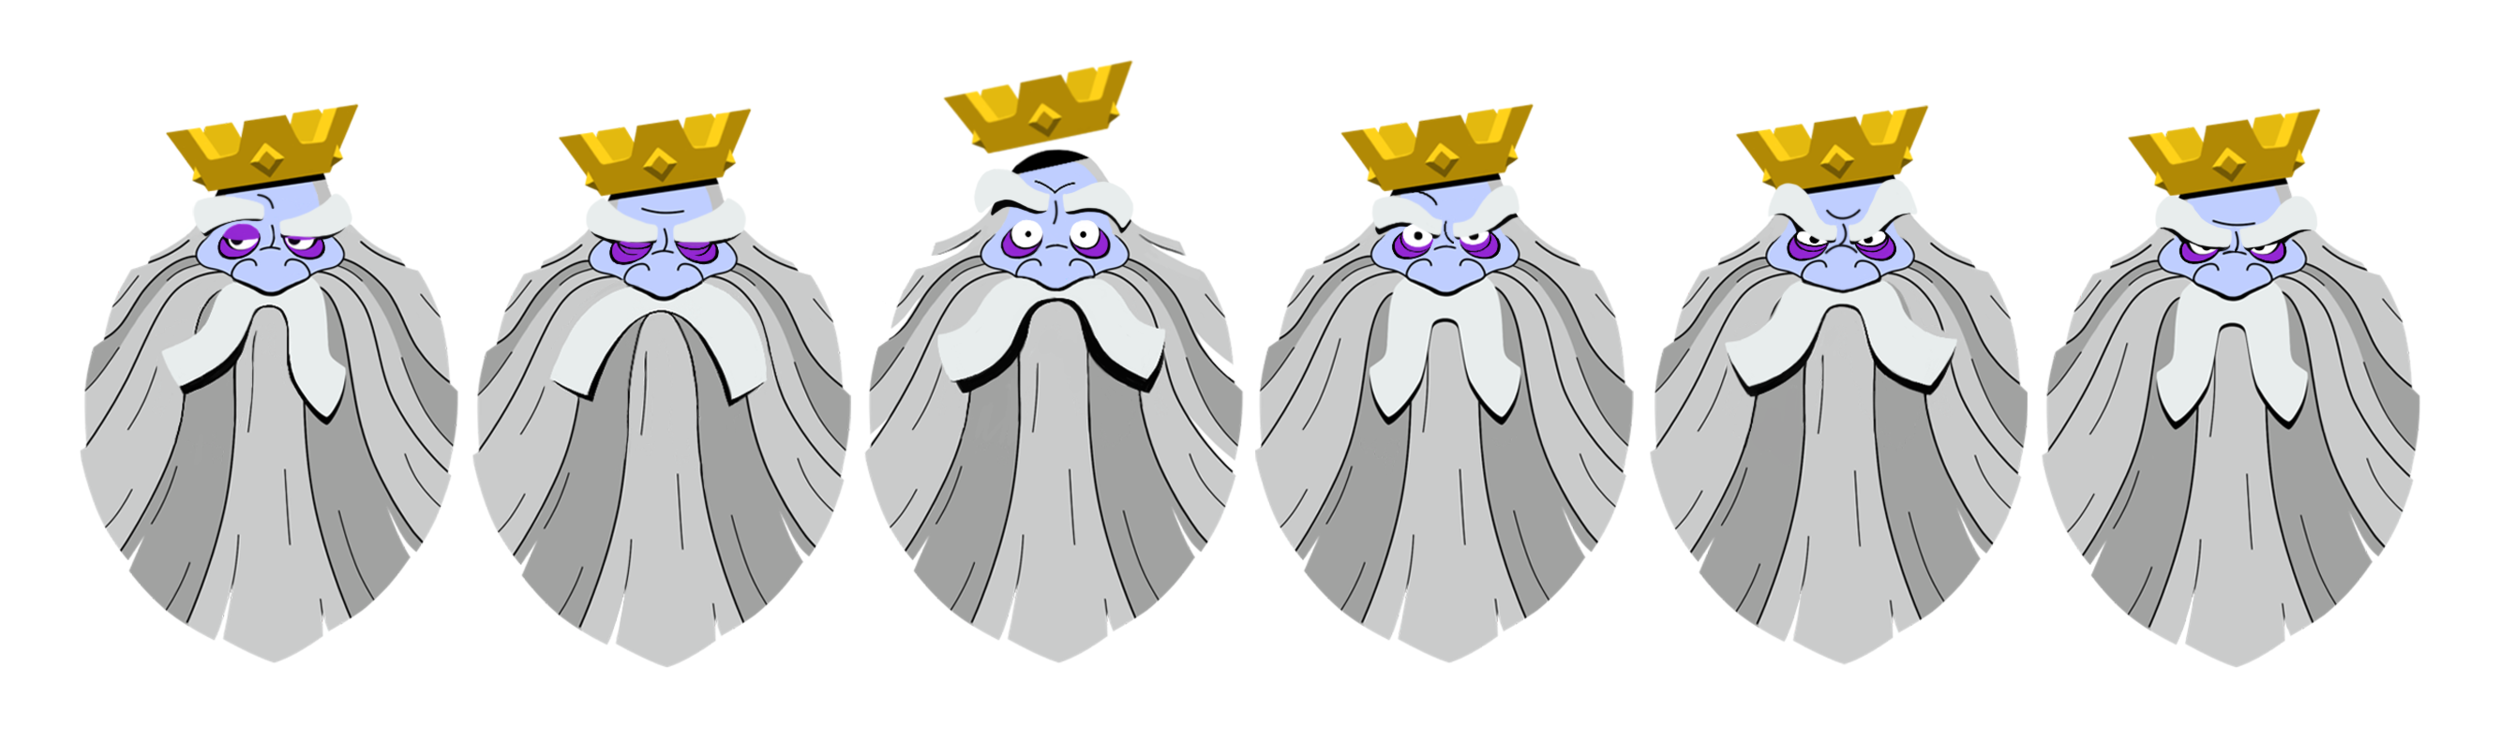 GHOST_CR_EXPRESSIONS.png